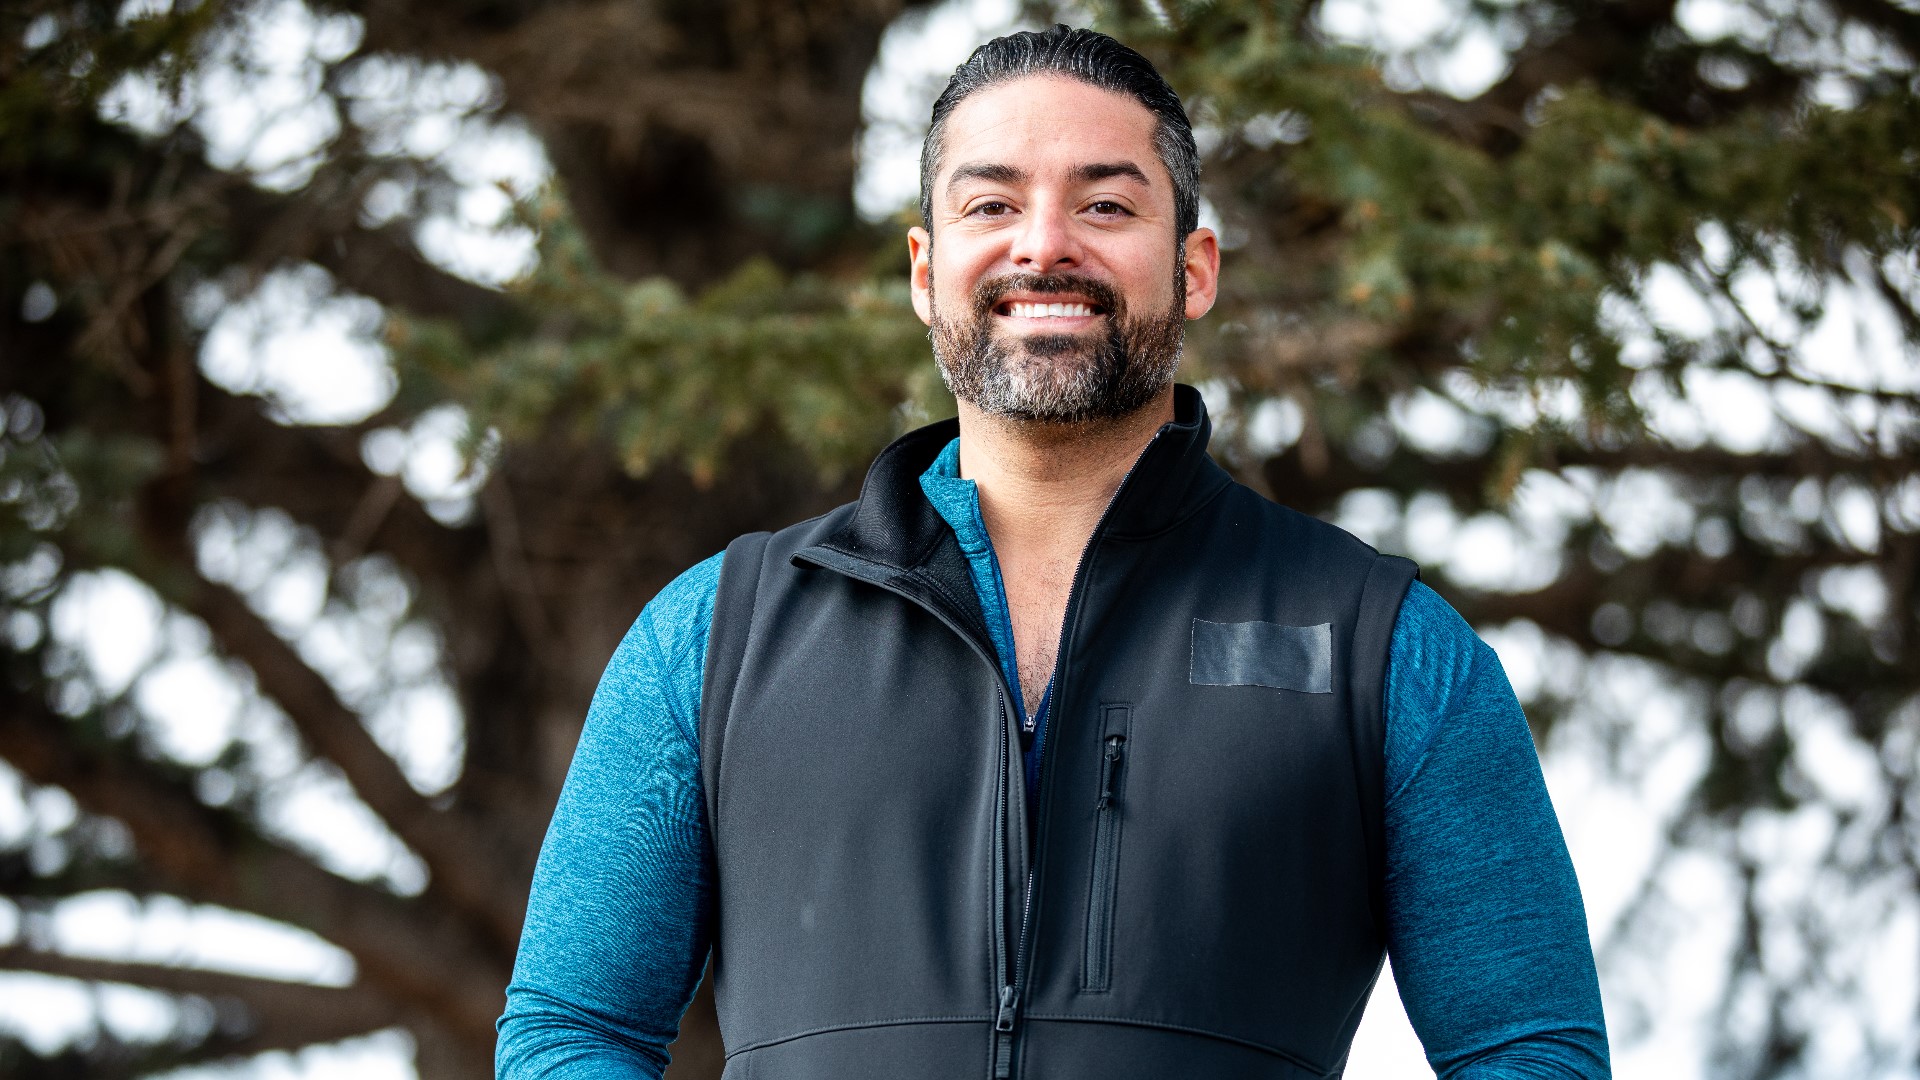 The Denver Home Show returns this weekend to the National Western Complex. One of the guest speakers is Denver-based realtor and renovator Rico León.